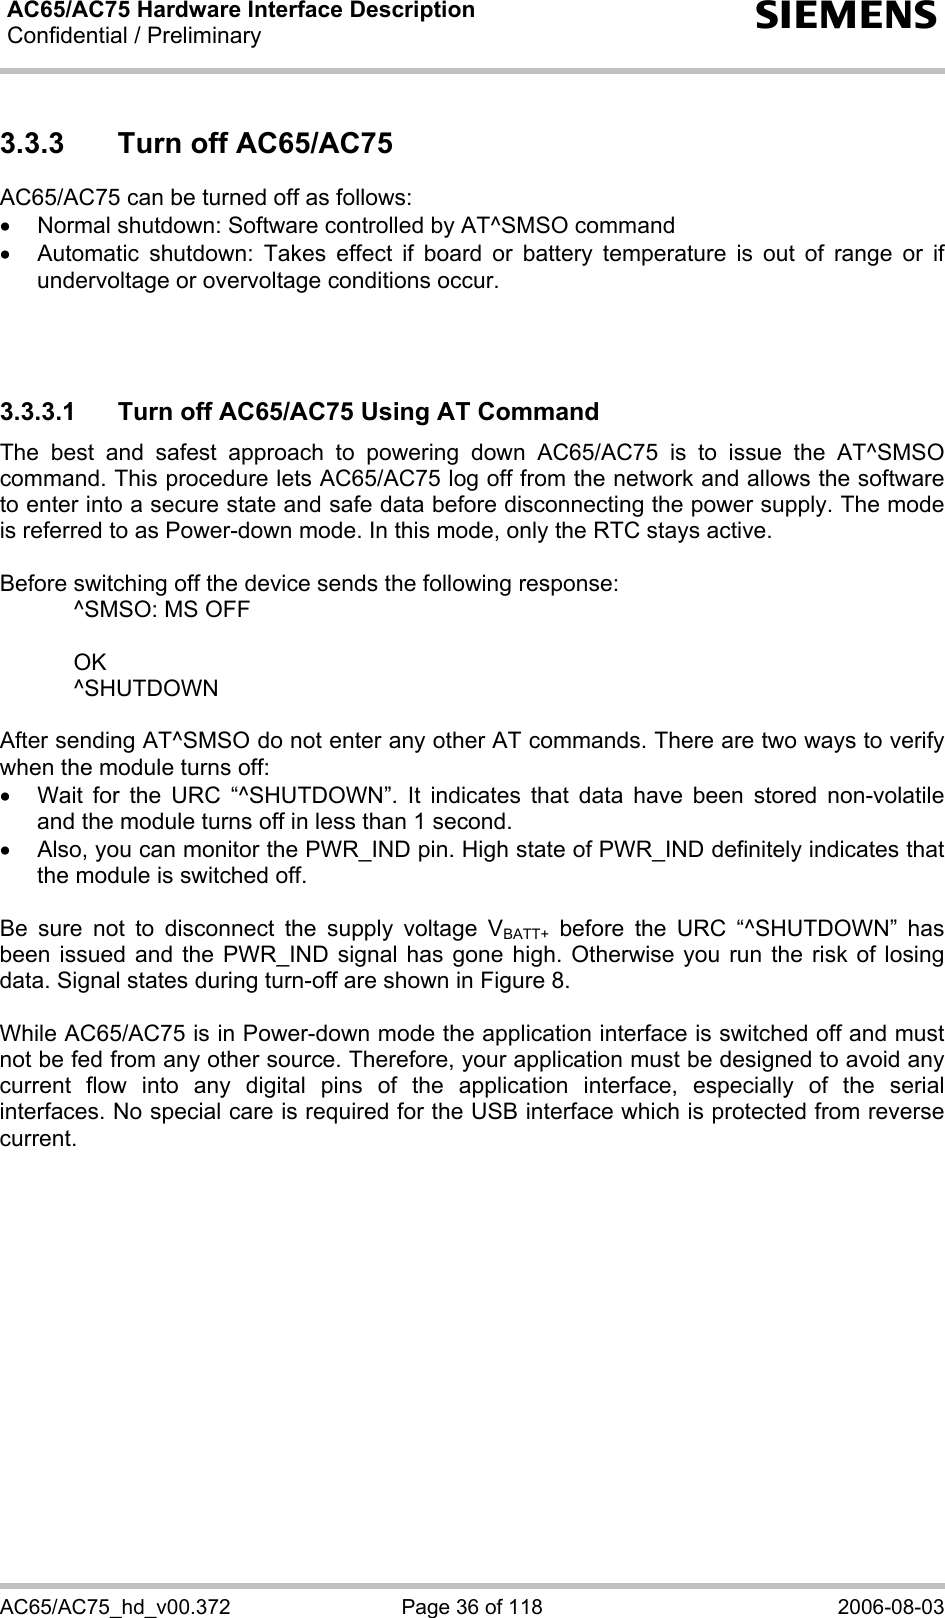 AC65/AC75 Hardware Interface Description Confidential / Preliminary  s AC65/AC75_hd_v00.372  Page 36 of 118  2006-08-03 3.3.3  Turn off AC65/AC75 AC65/AC75 can be turned off as follows: •  Normal shutdown: Software controlled by AT^SMSO command •  Automatic shutdown: Takes effect if board or battery temperature is out of range or if undervoltage or overvoltage conditions occur.    3.3.3.1  Turn off AC65/AC75 Using AT Command The best and safest approach to powering down AC65/AC75 is to issue the AT^SMSO command. This procedure lets AC65/AC75 log off from the network and allows the software to enter into a secure state and safe data before disconnecting the power supply. The mode is referred to as Power-down mode. In this mode, only the RTC stays active.  Before switching off the device sends the following response:     ^SMSO: MS OFF    OK   ^SHUTDOWN  After sending AT^SMSO do not enter any other AT commands. There are two ways to verify when the module turns off:  •  Wait for the URC “^SHUTDOWN”. It indicates that data have been stored non-volatile and the module turns off in less than 1 second. •  Also, you can monitor the PWR_IND pin. High state of PWR_IND definitely indicates that the module is switched off.  Be sure not to disconnect the supply voltage VBATT+ before the URC “^SHUTDOWN” has been issued and the PWR_IND signal has gone high. Otherwise you run the risk of losing data. Signal states during turn-off are shown in Figure 8.  While AC65/AC75 is in Power-down mode the application interface is switched off and must not be fed from any other source. Therefore, your application must be designed to avoid any current flow into any digital pins of the application interface, especially of the serial interfaces. No special care is required for the USB interface which is protected from reverse current.   